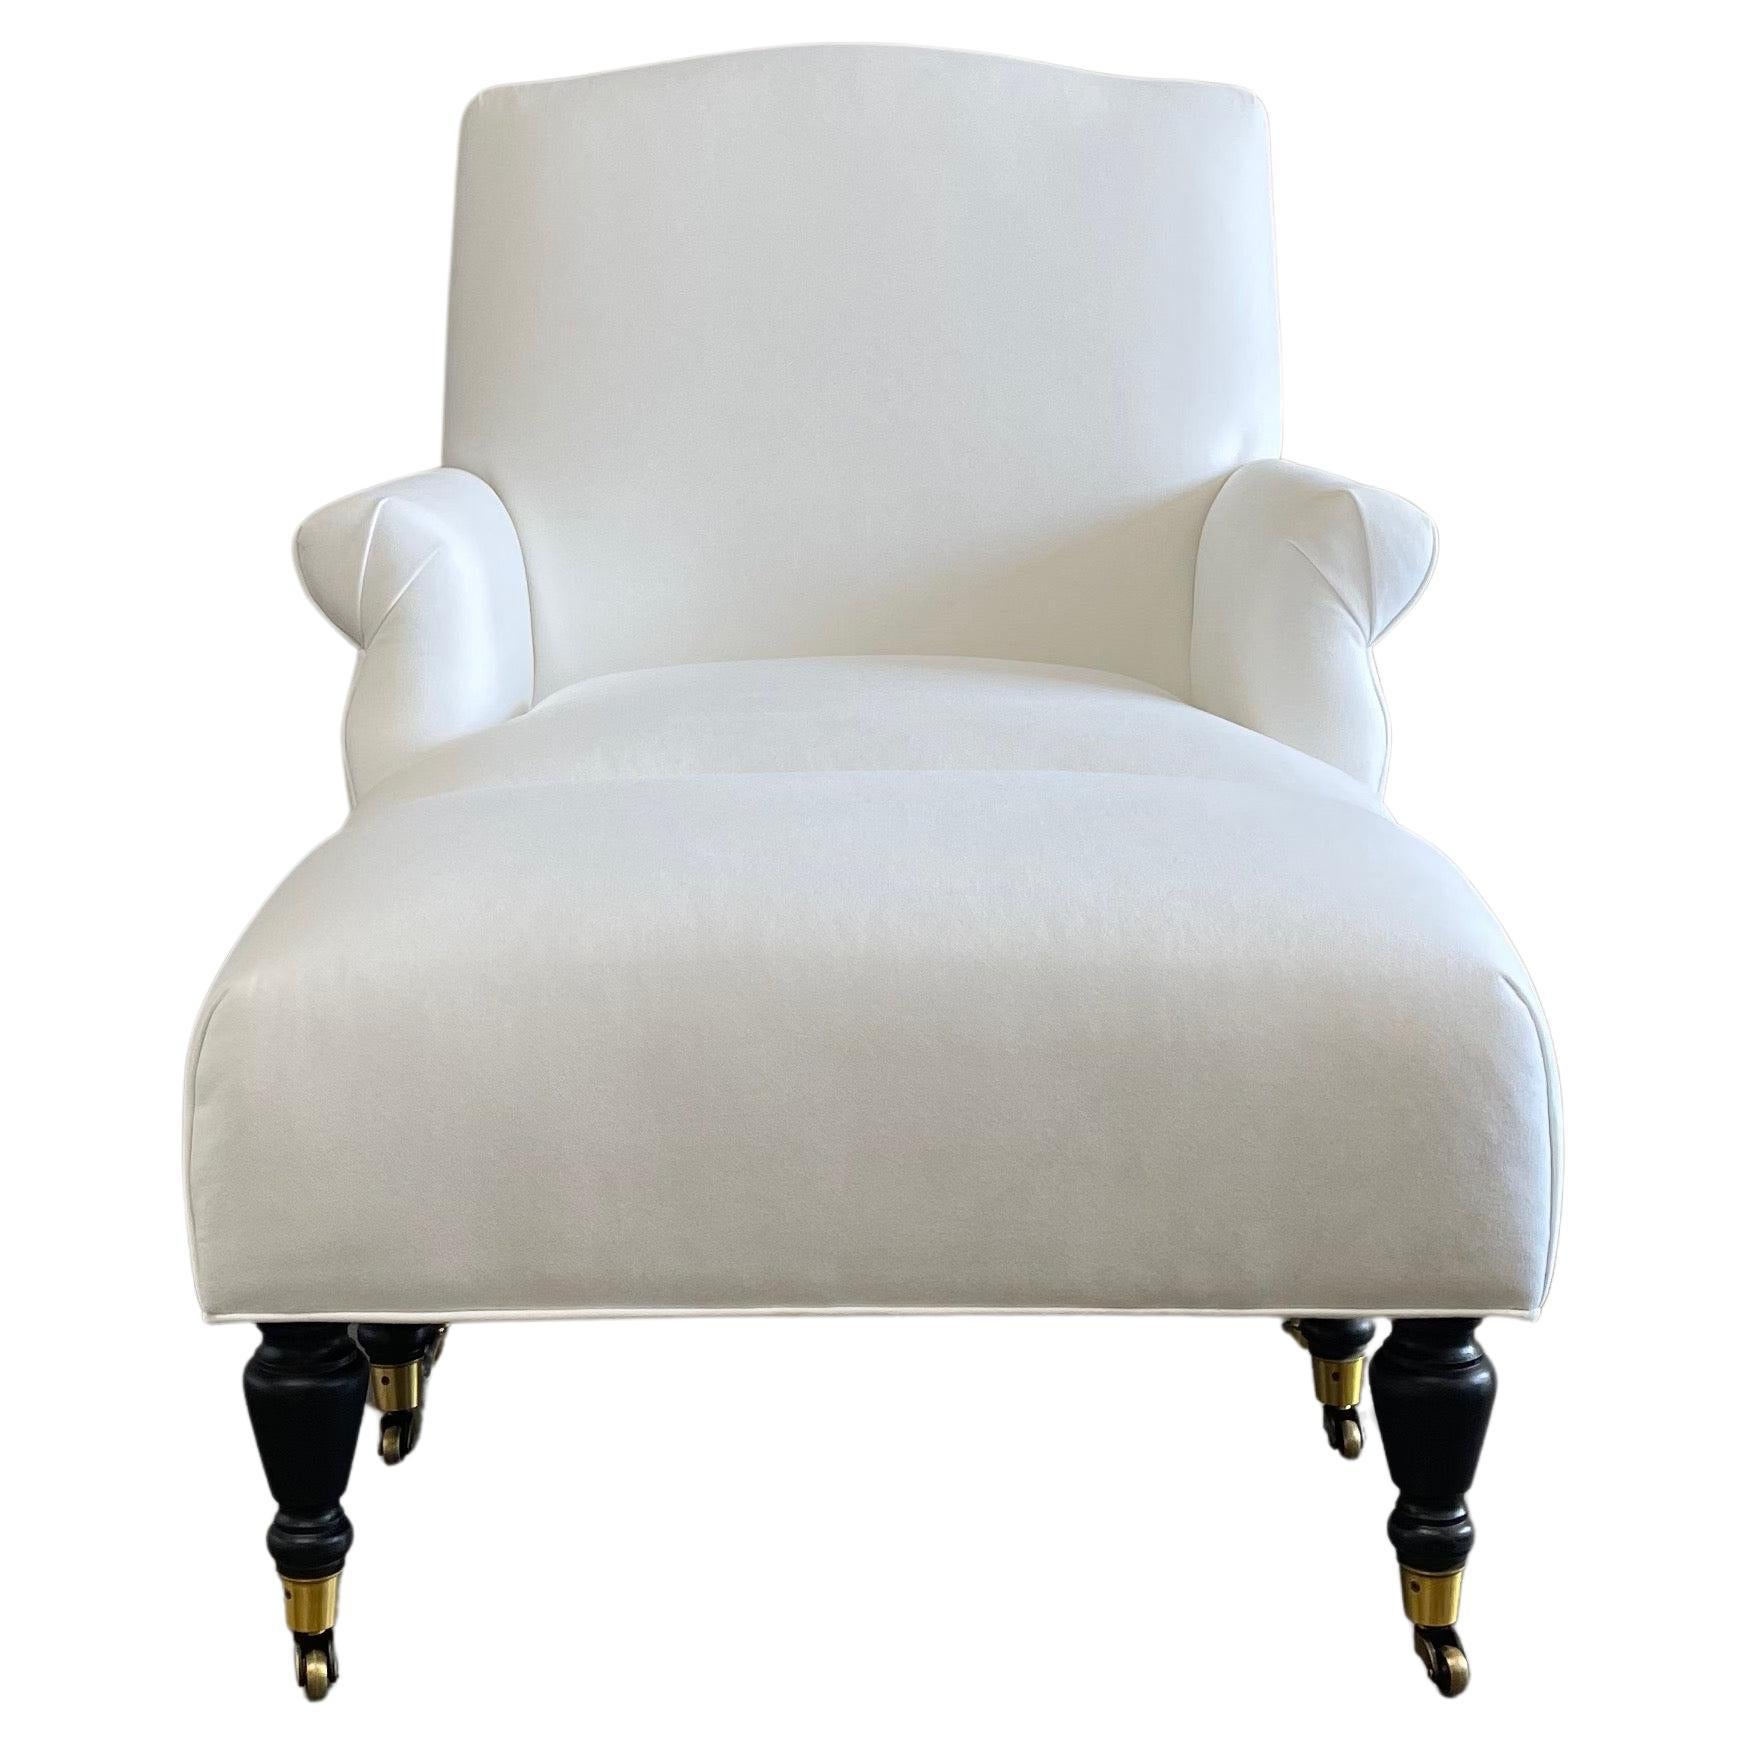 French inspired upholstered linen bergère chair and ottoman, are French inspired chair are based on an original Napoleon III style pair of chairs. Napoleon III was the nephew of Napoleon Bonaparte. This style dates from the mid- to late 19th